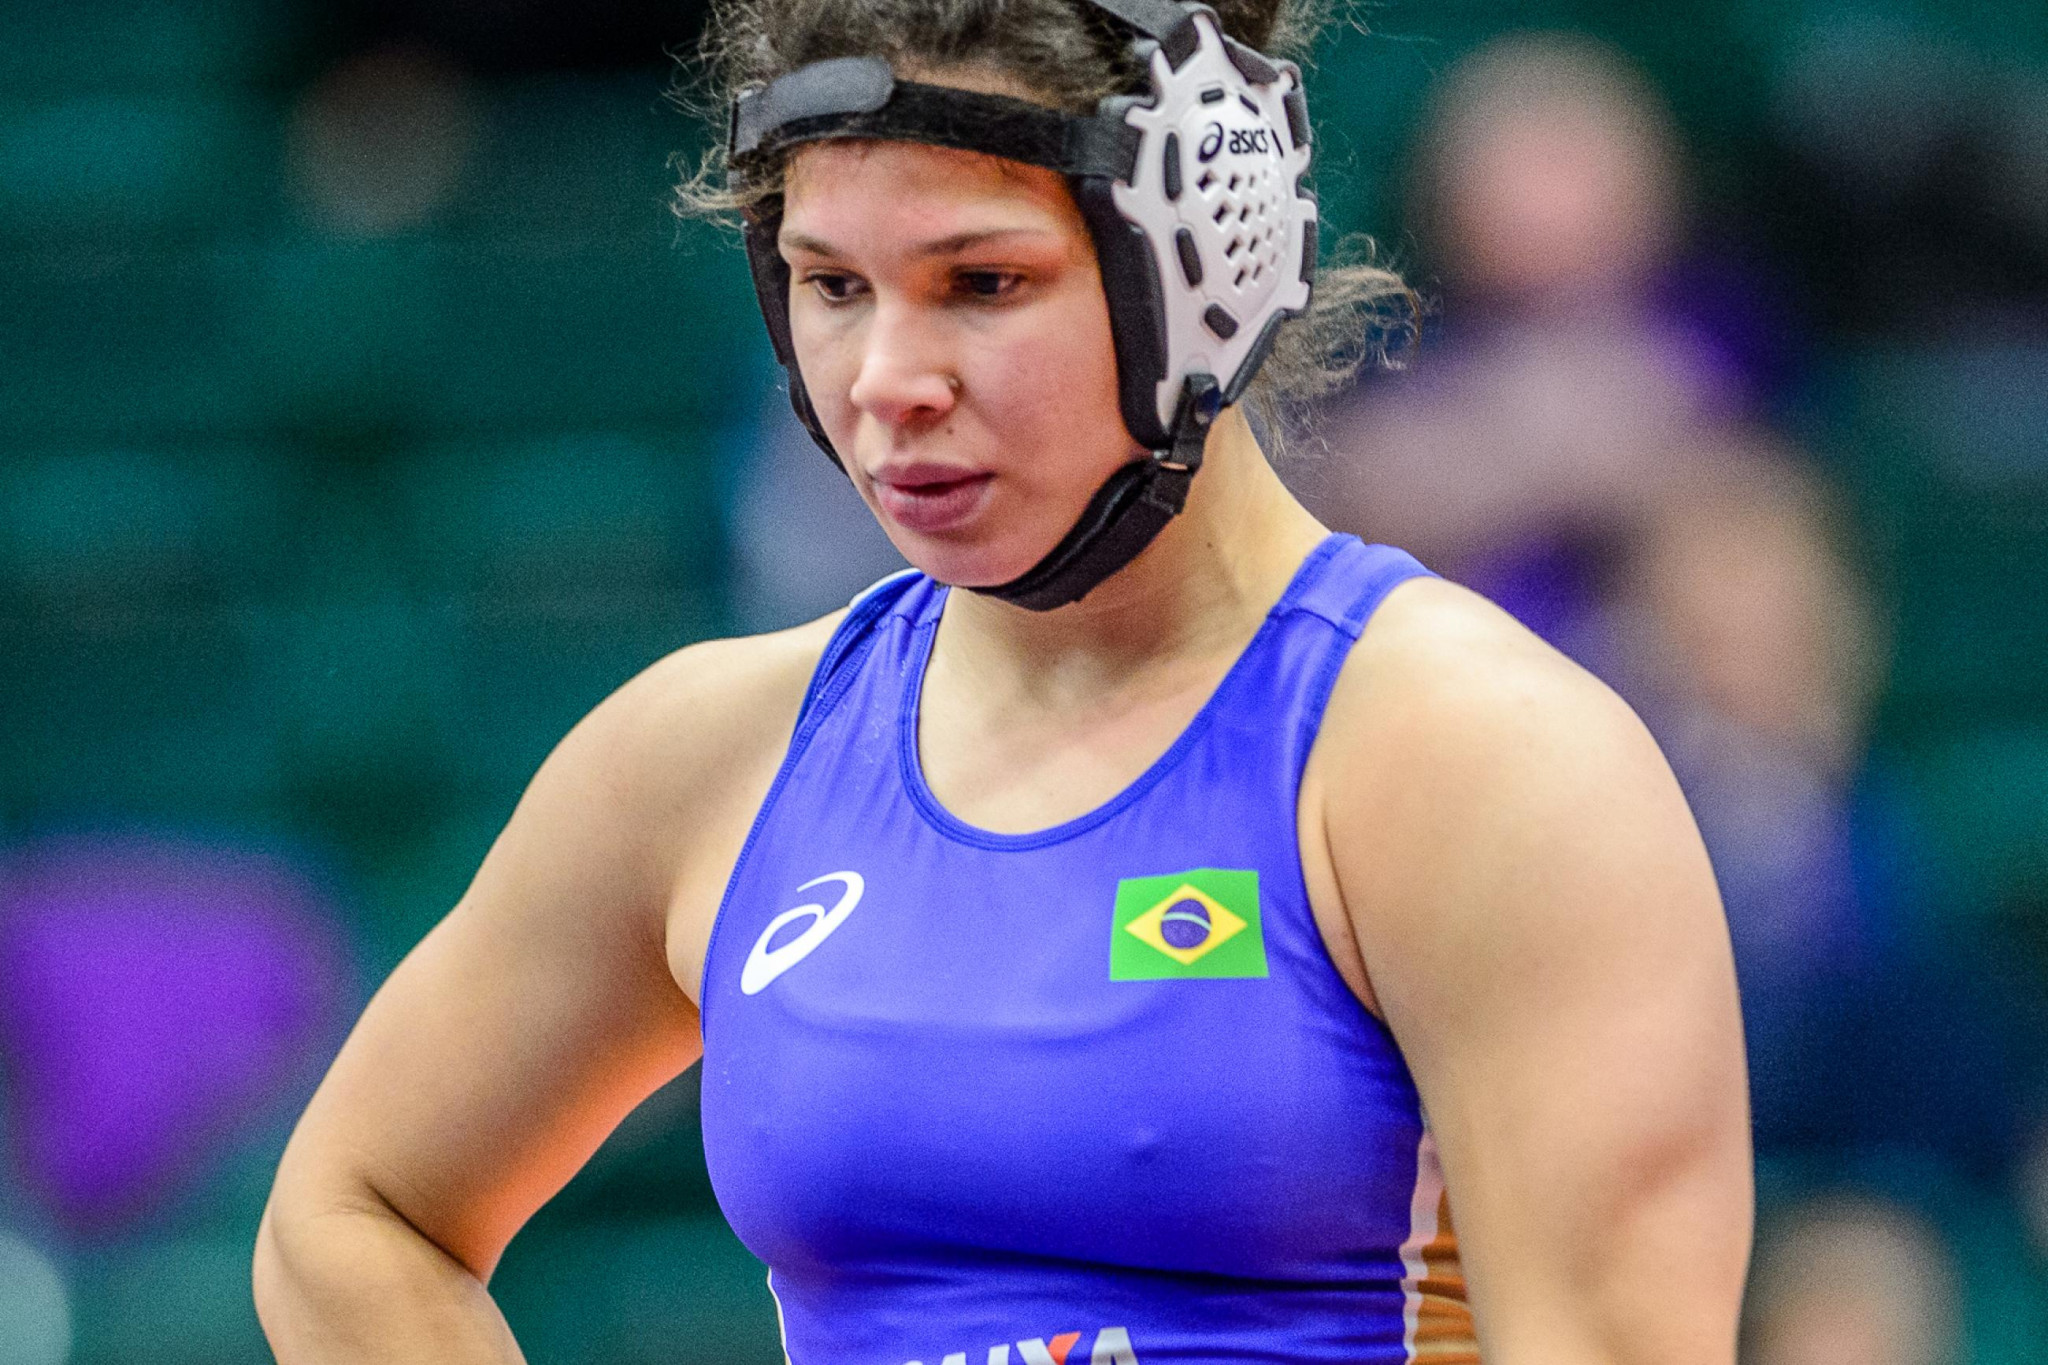 Lais Nunes de Oliveira prevented another member of the US team from topping a podium ©UWW